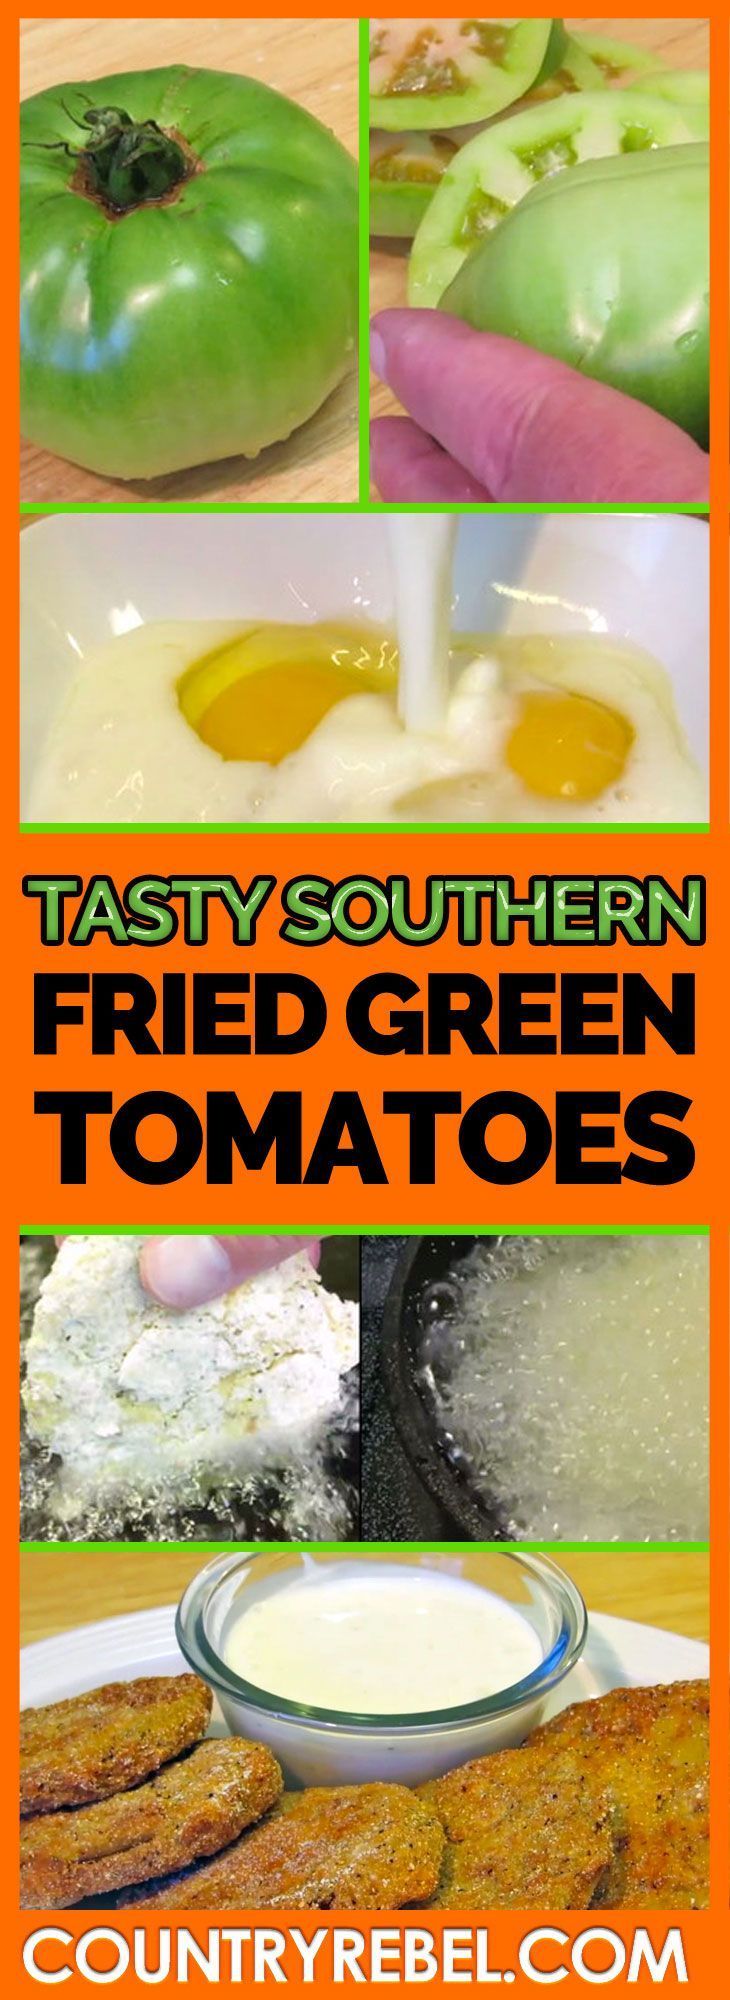 Incredible Tasty Southern Fried Green Tomatoes Recipe!